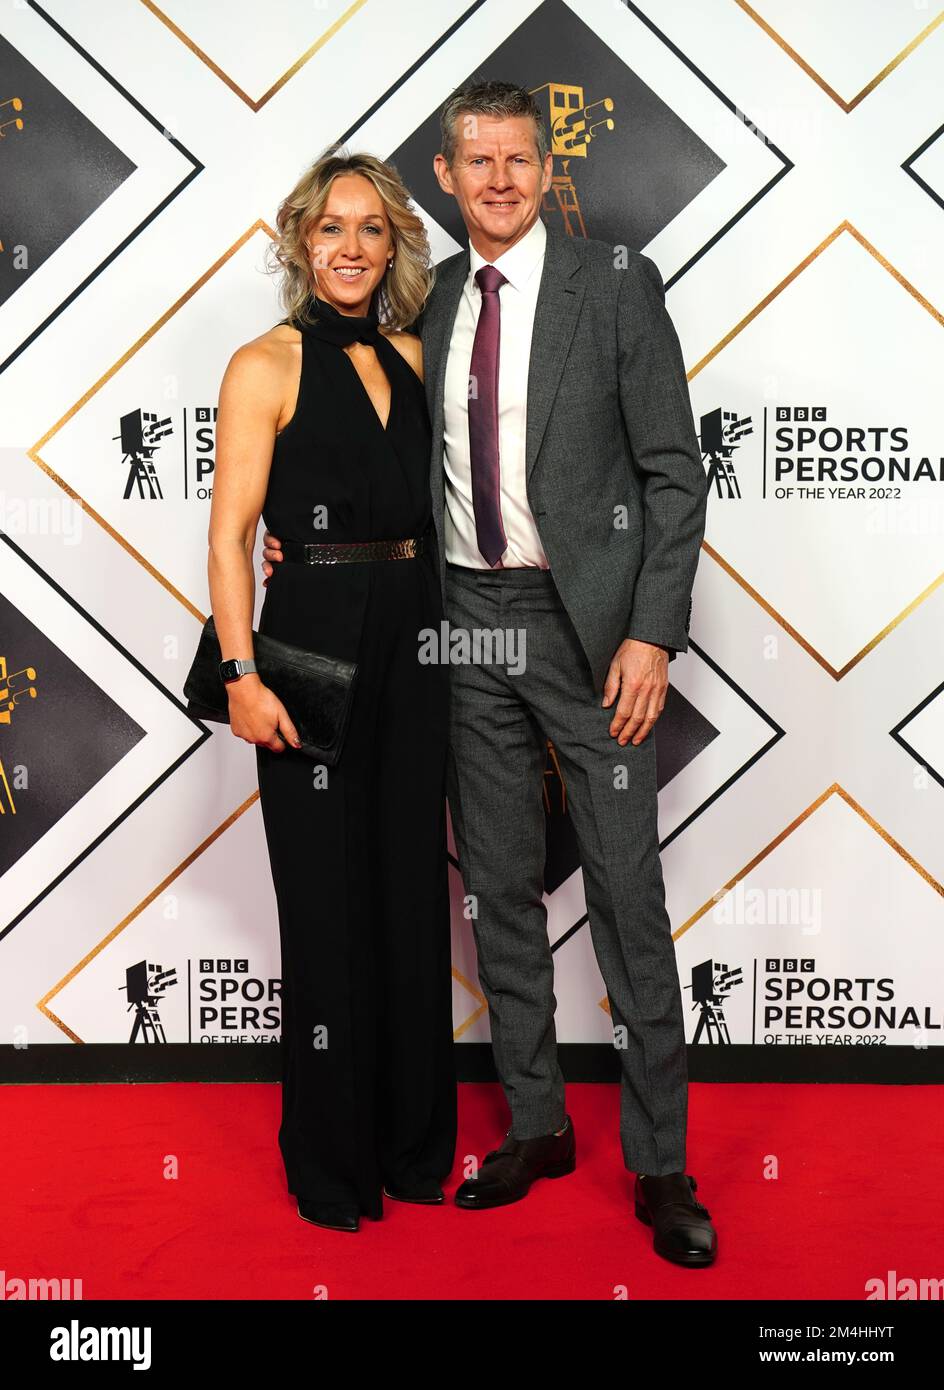 Steve Cram poses on the red carpet prior to the BBC Sports Personality of the Year Awards 2022 held at MediaCity UK, Salford. Picture date: Wednesday December 21, 2022. Stock Photo